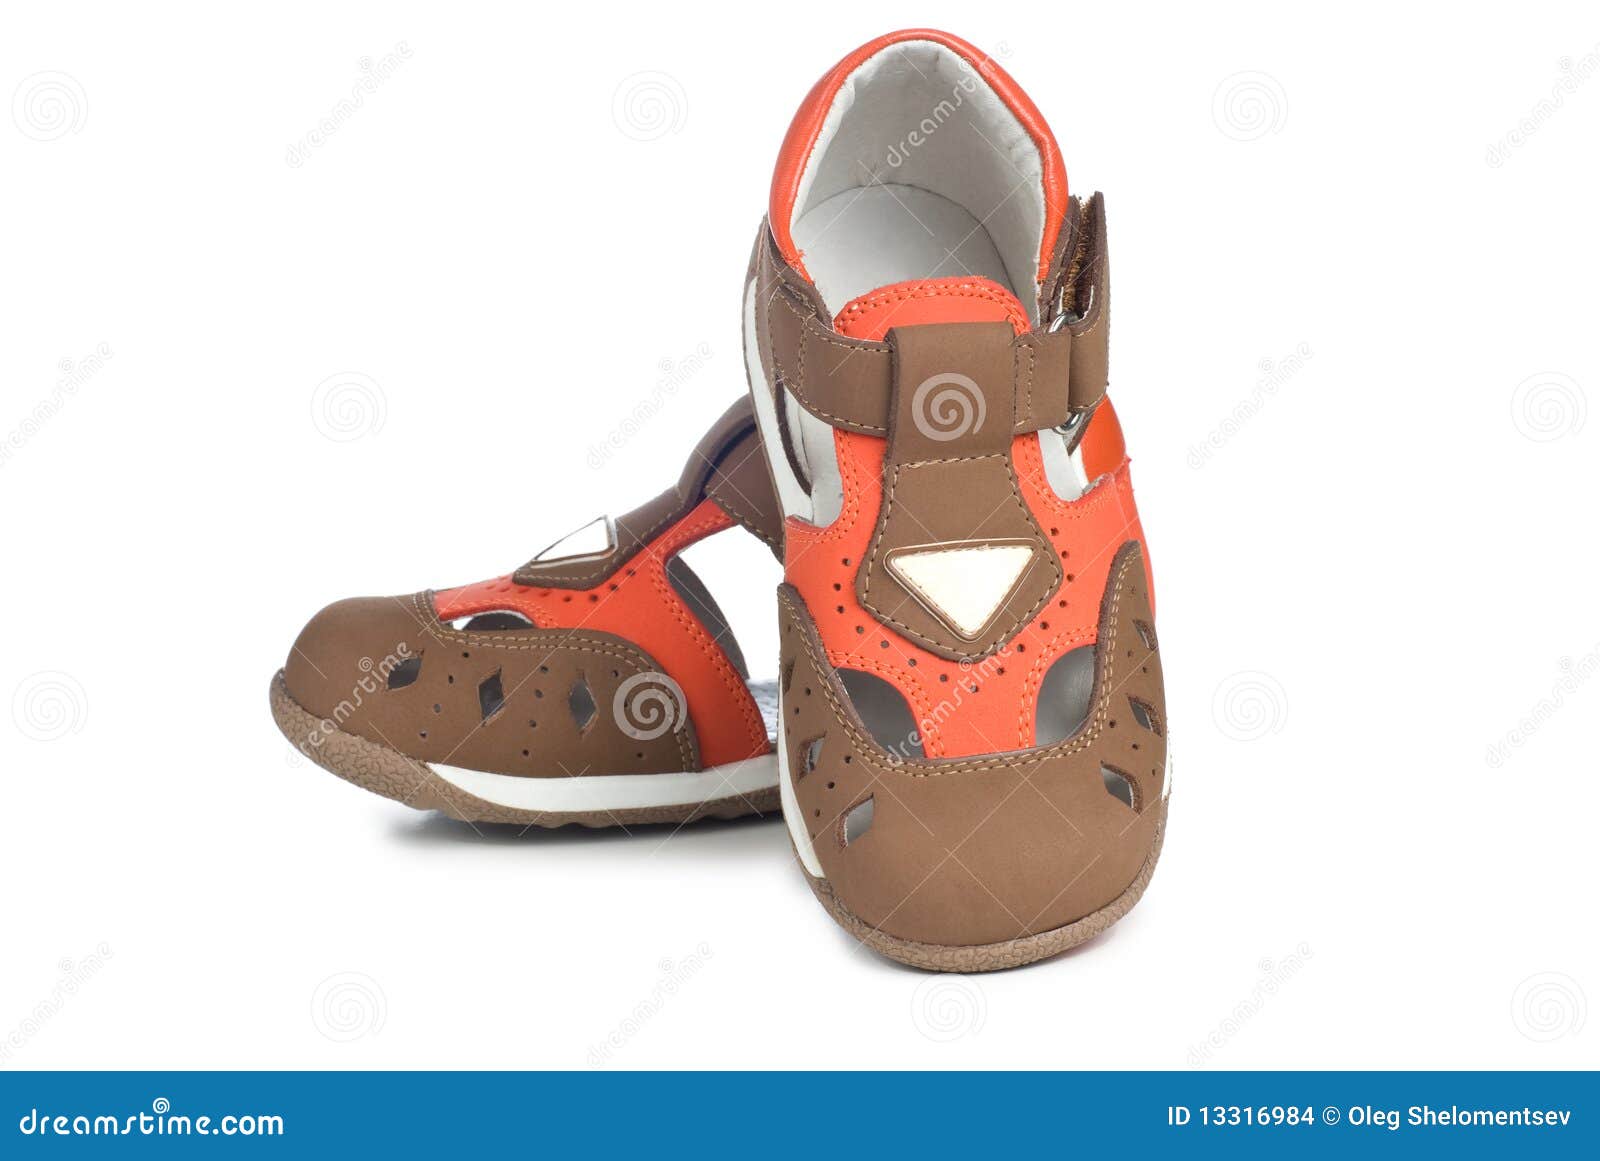 Kids Leather Shoes. Stock Images - Image: 13316984